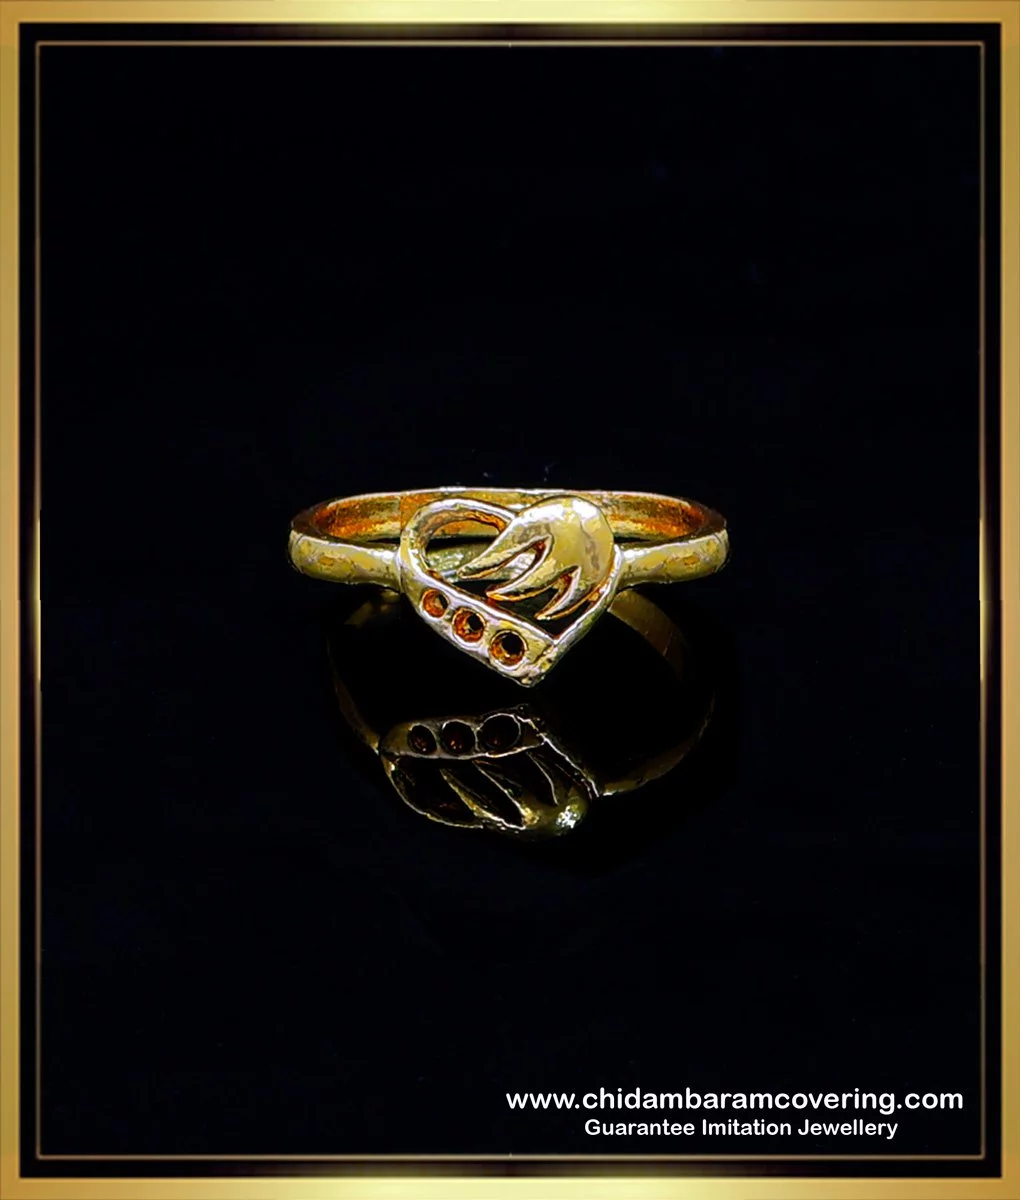 Buy Rings For Men Online in India | Latest Designs at Best Price | PC  Jeweller